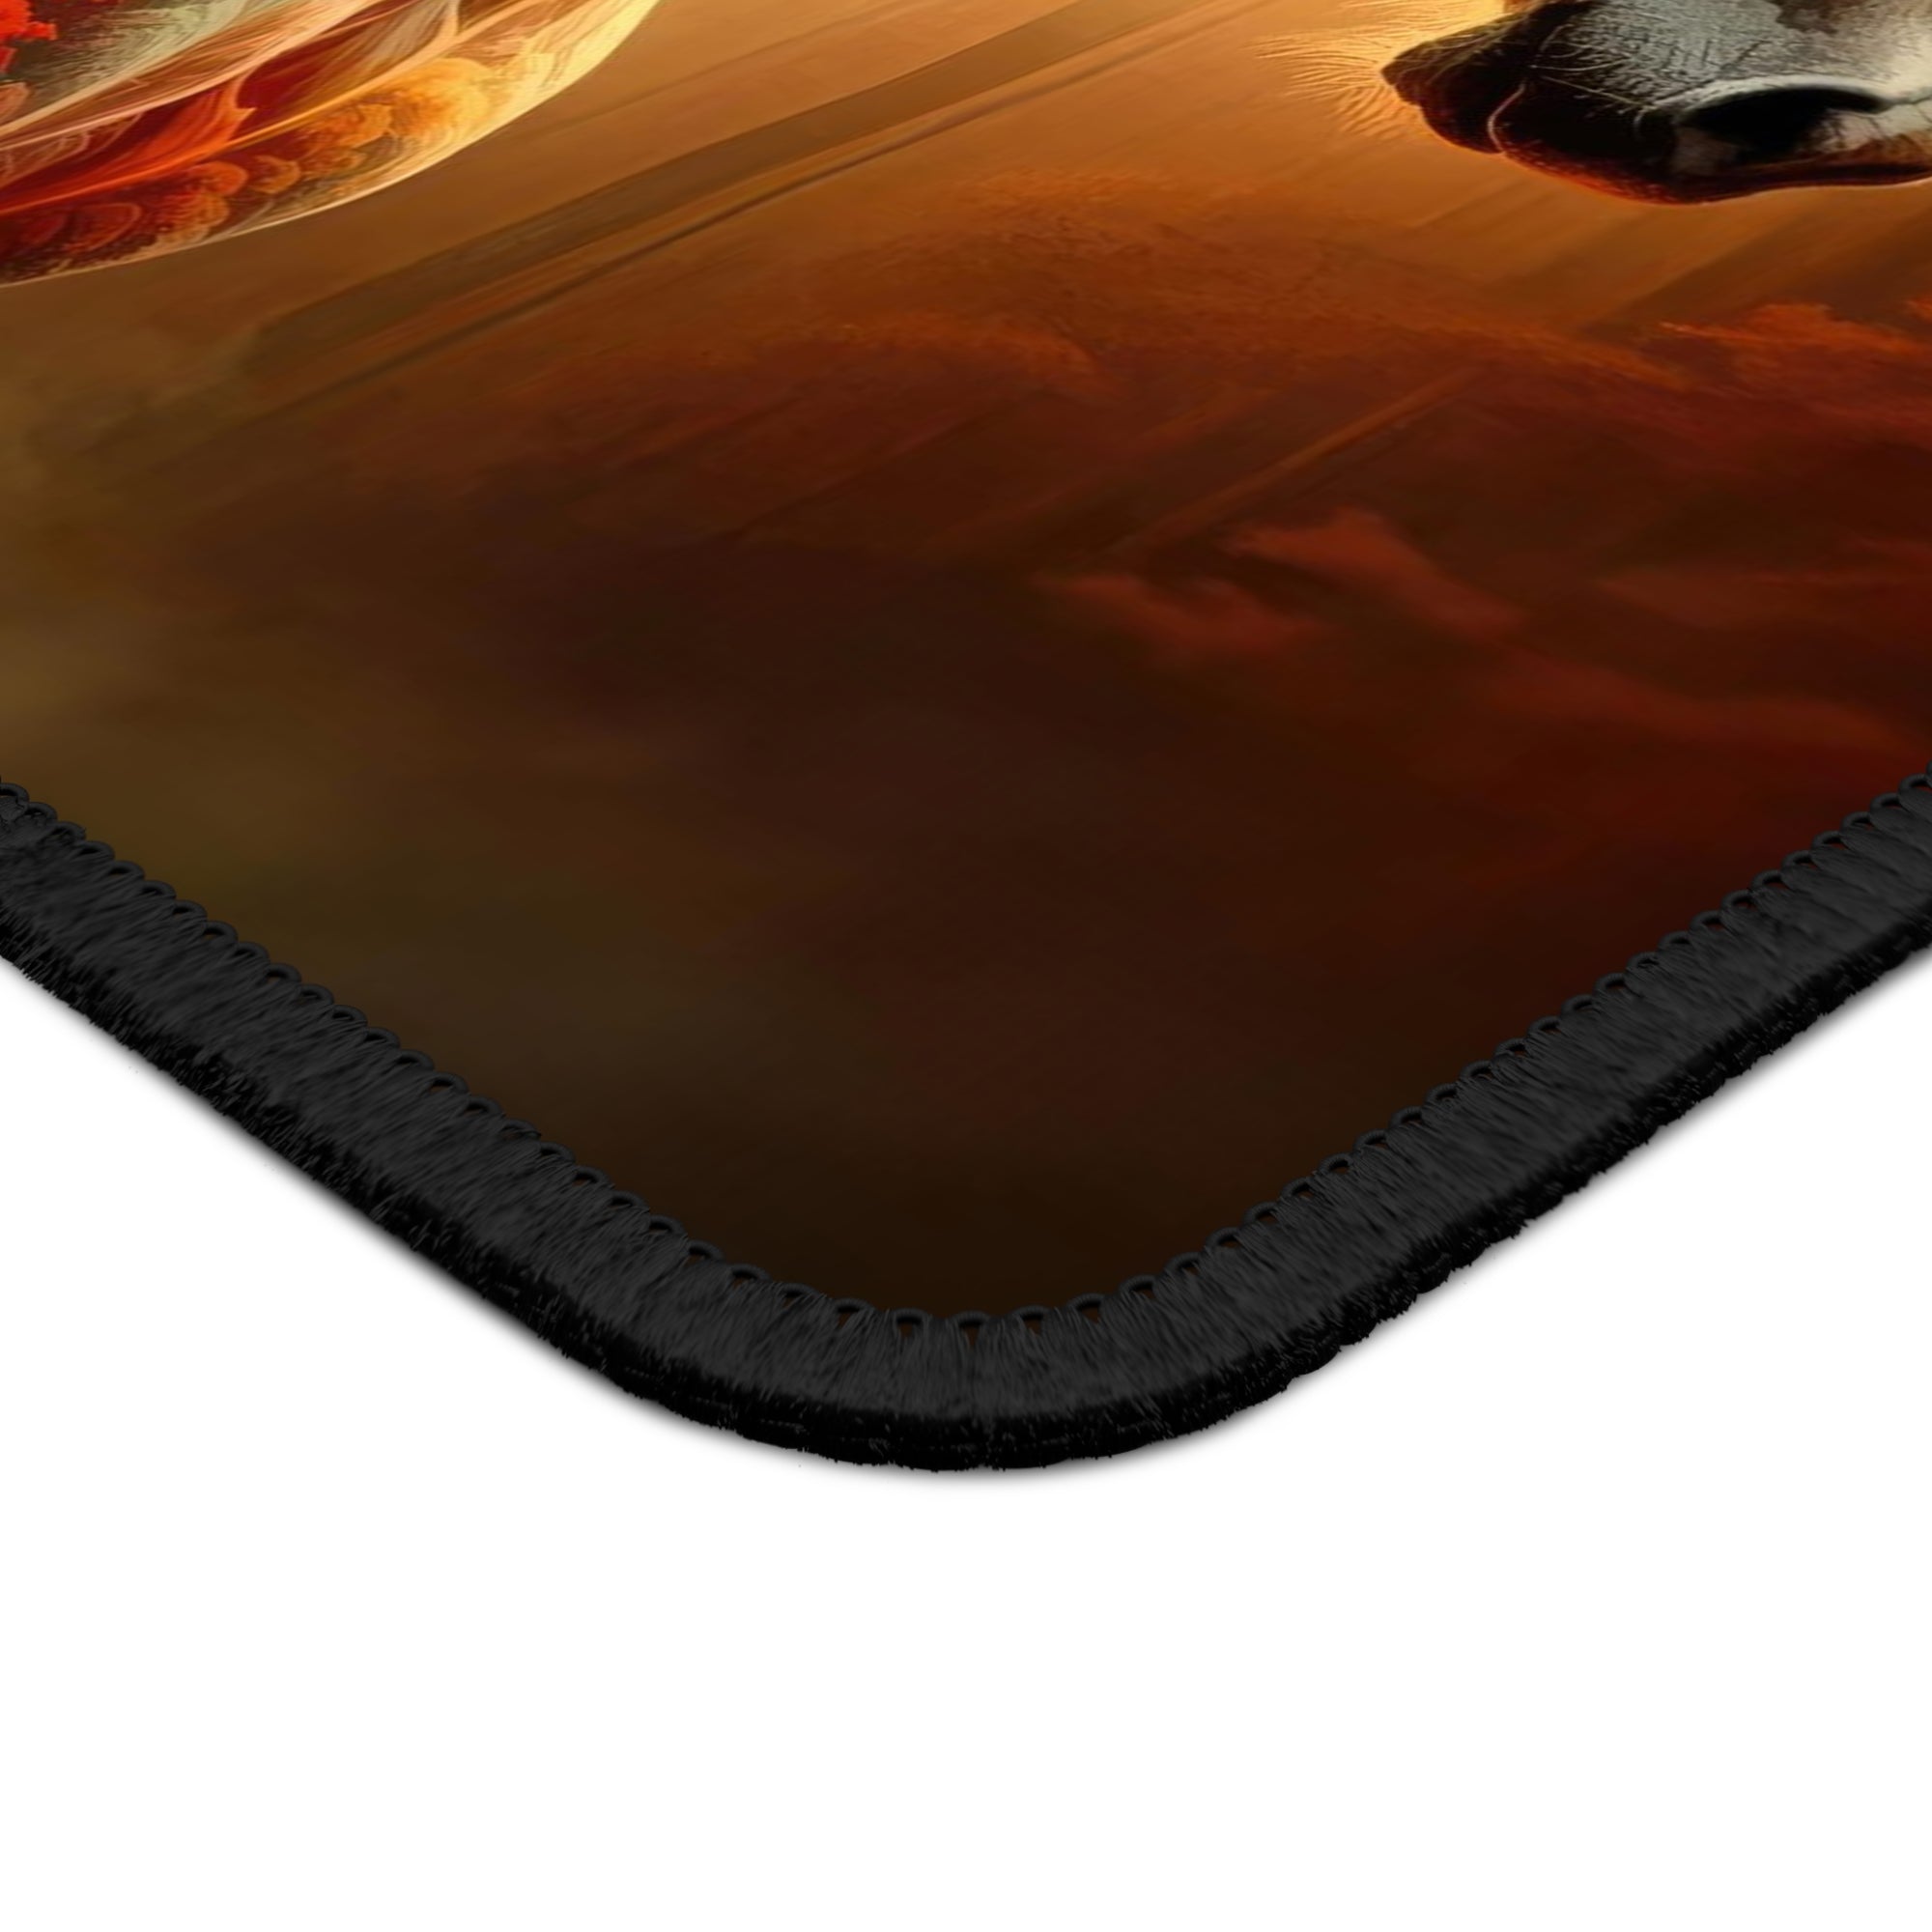 The Equine Illusion Gaming Mouse Pad